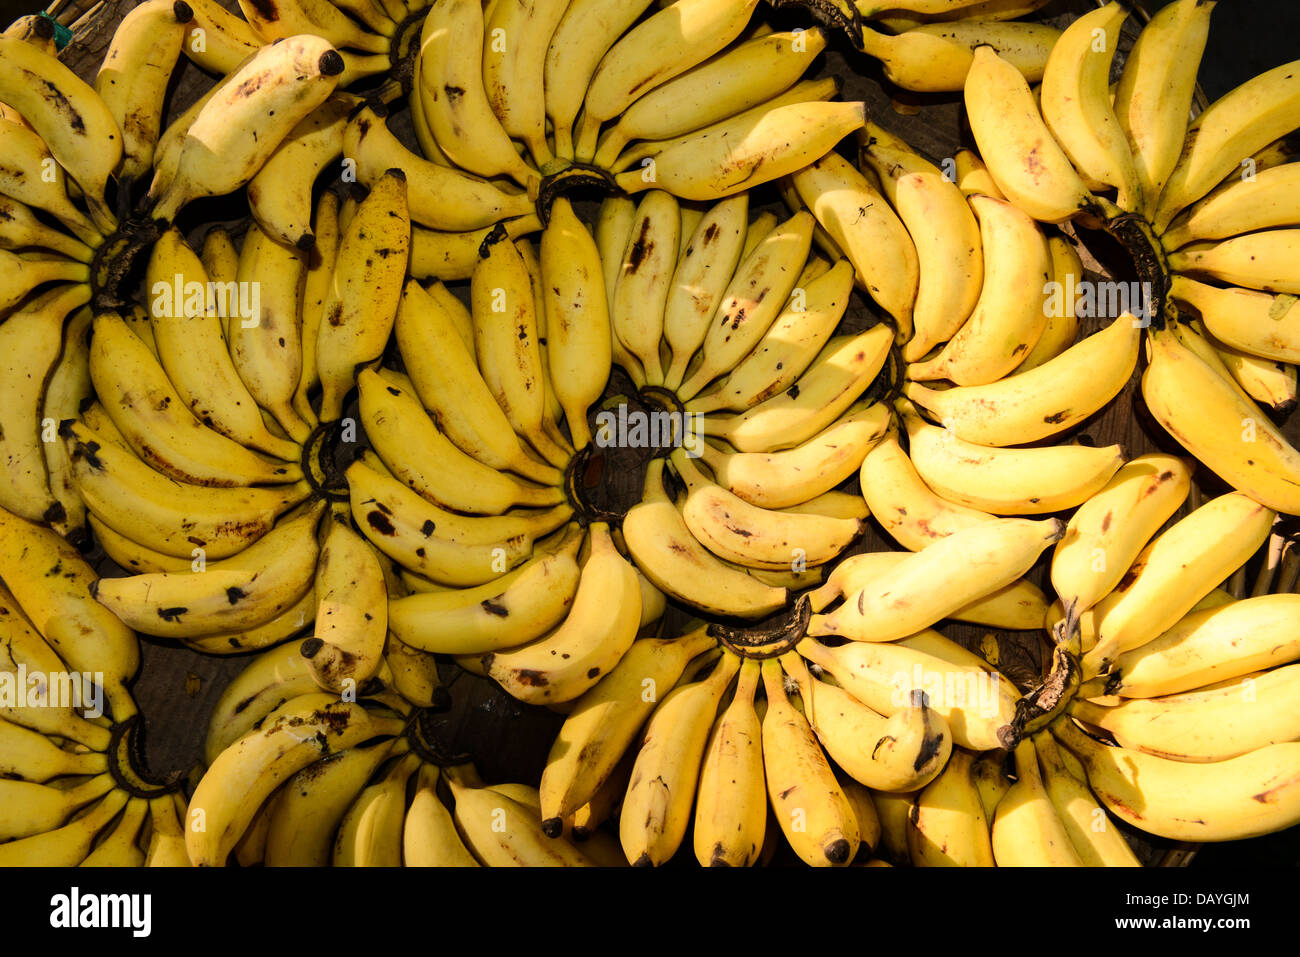 Bananas for Sale at the Market Stock Photo